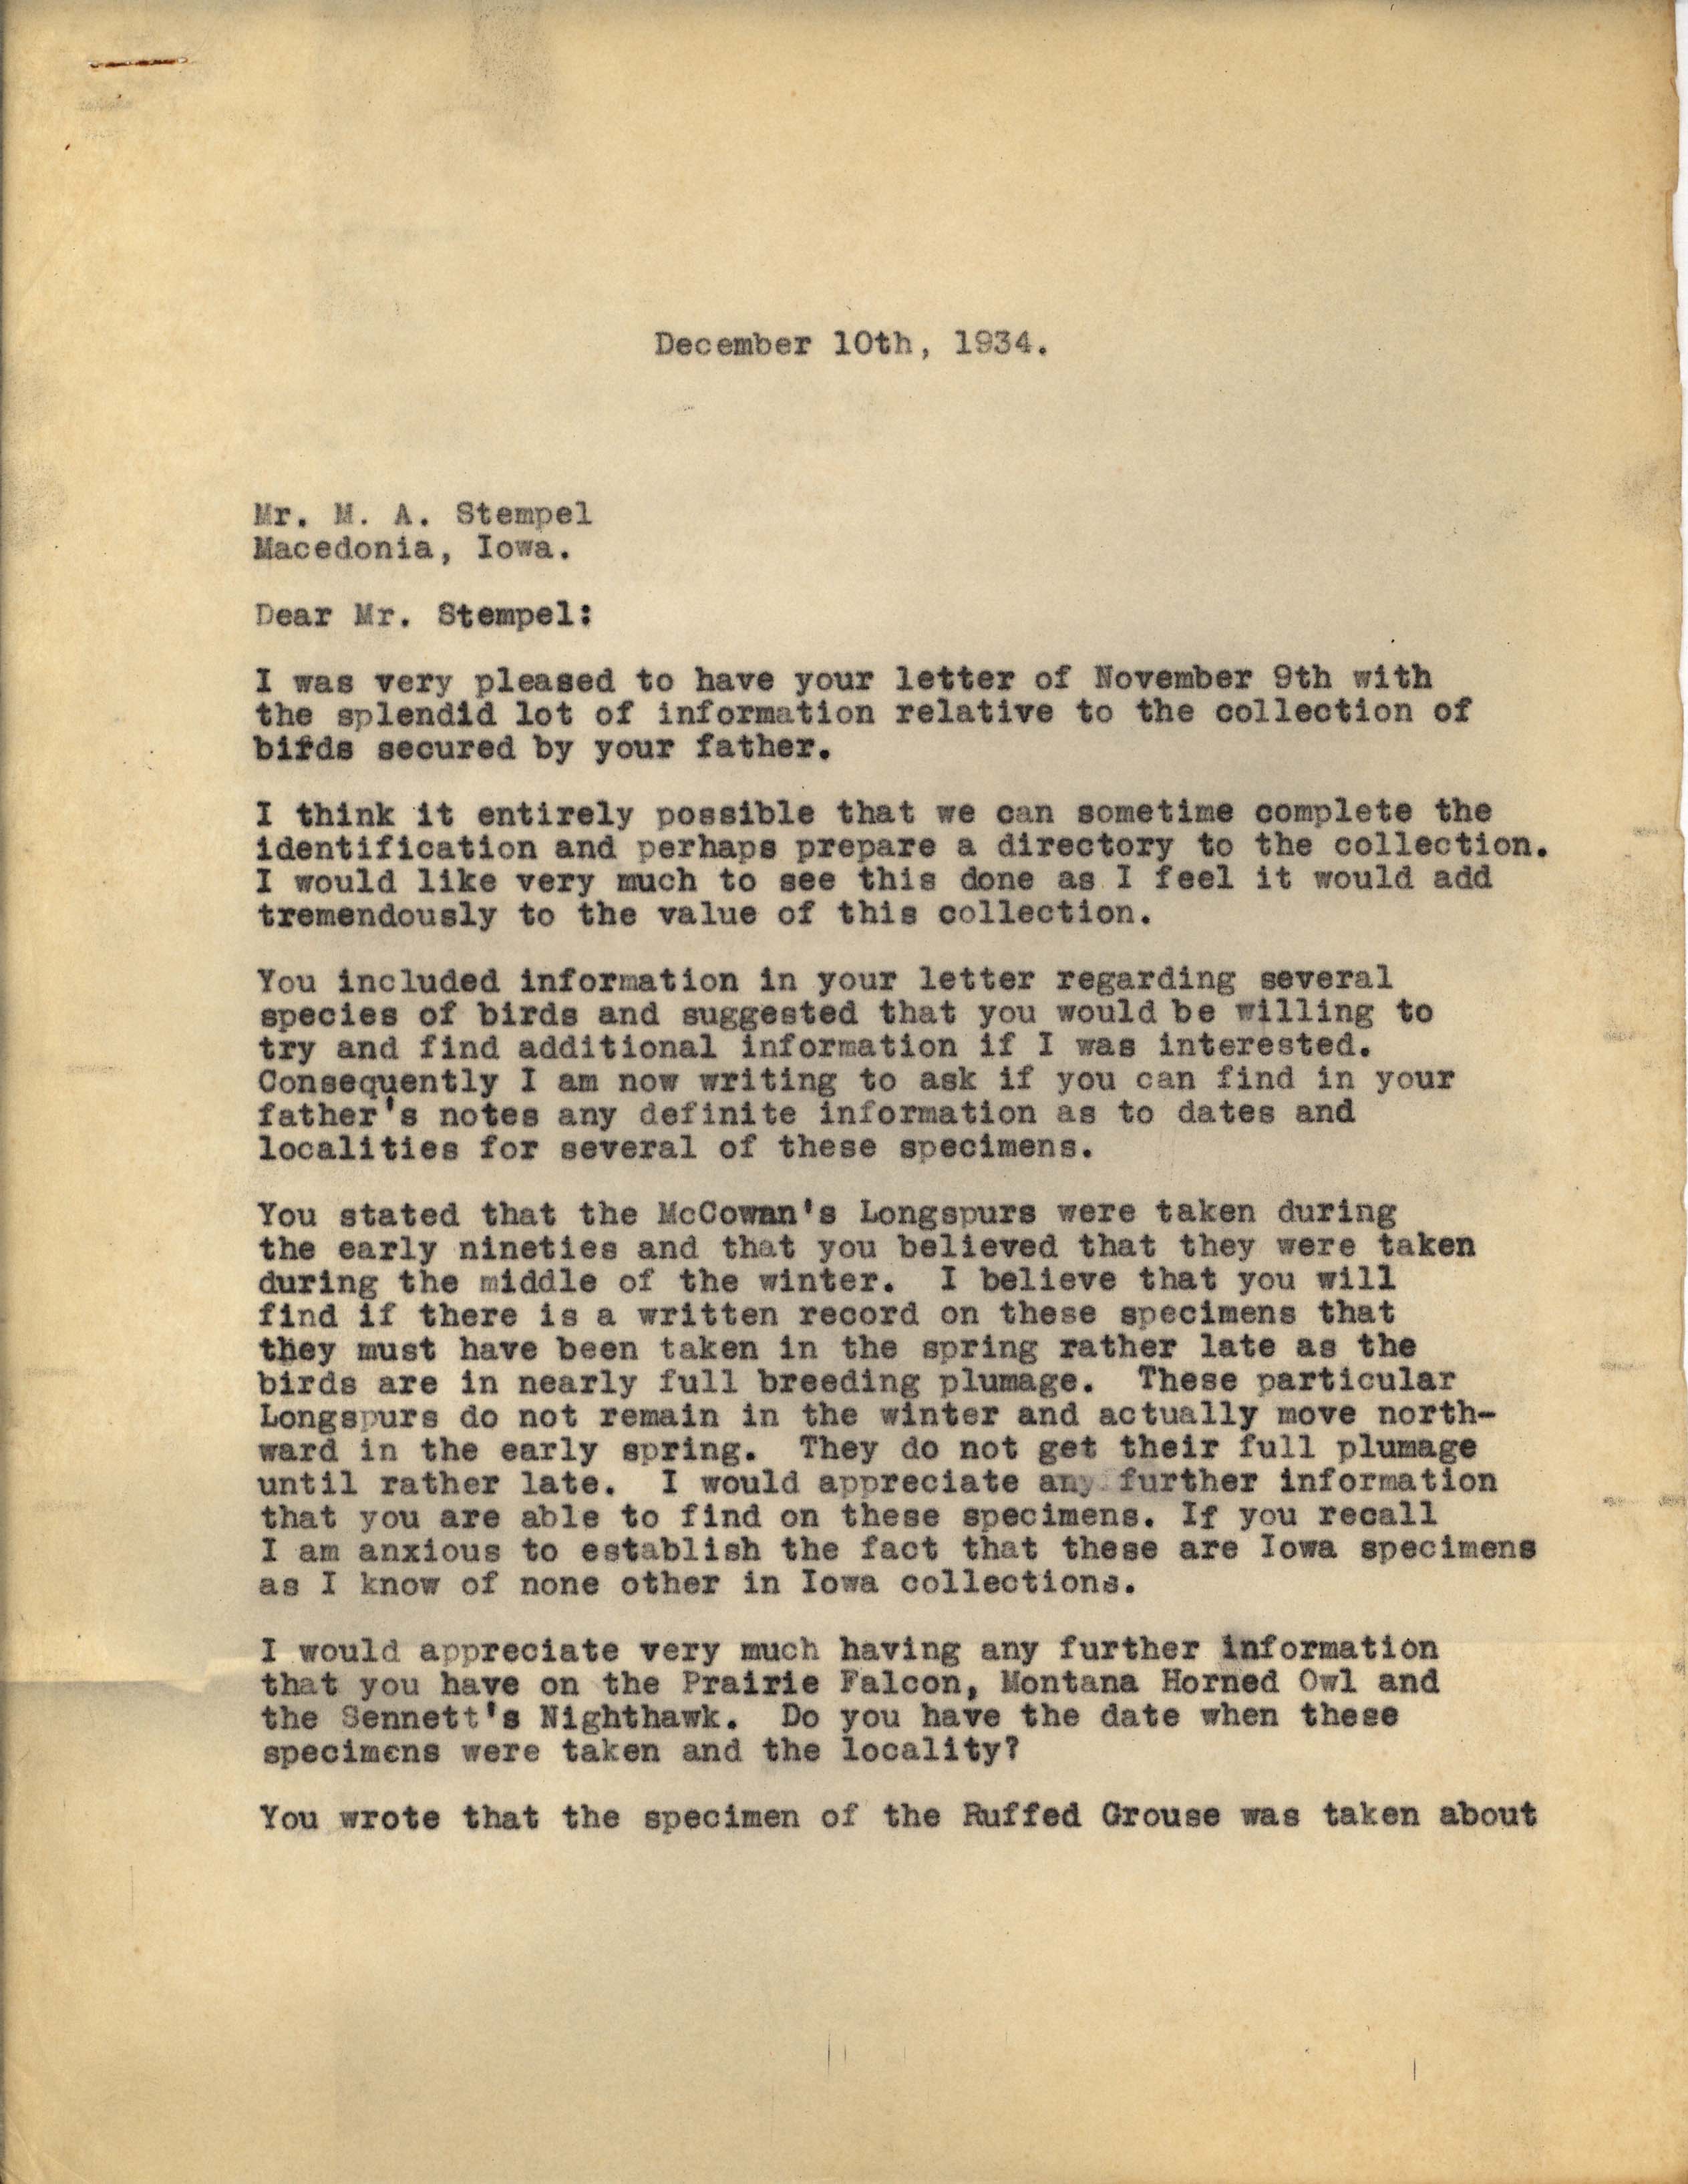 Philip DuMont letter to Max Stempel regarding the Stempel collection, December 10, 1934